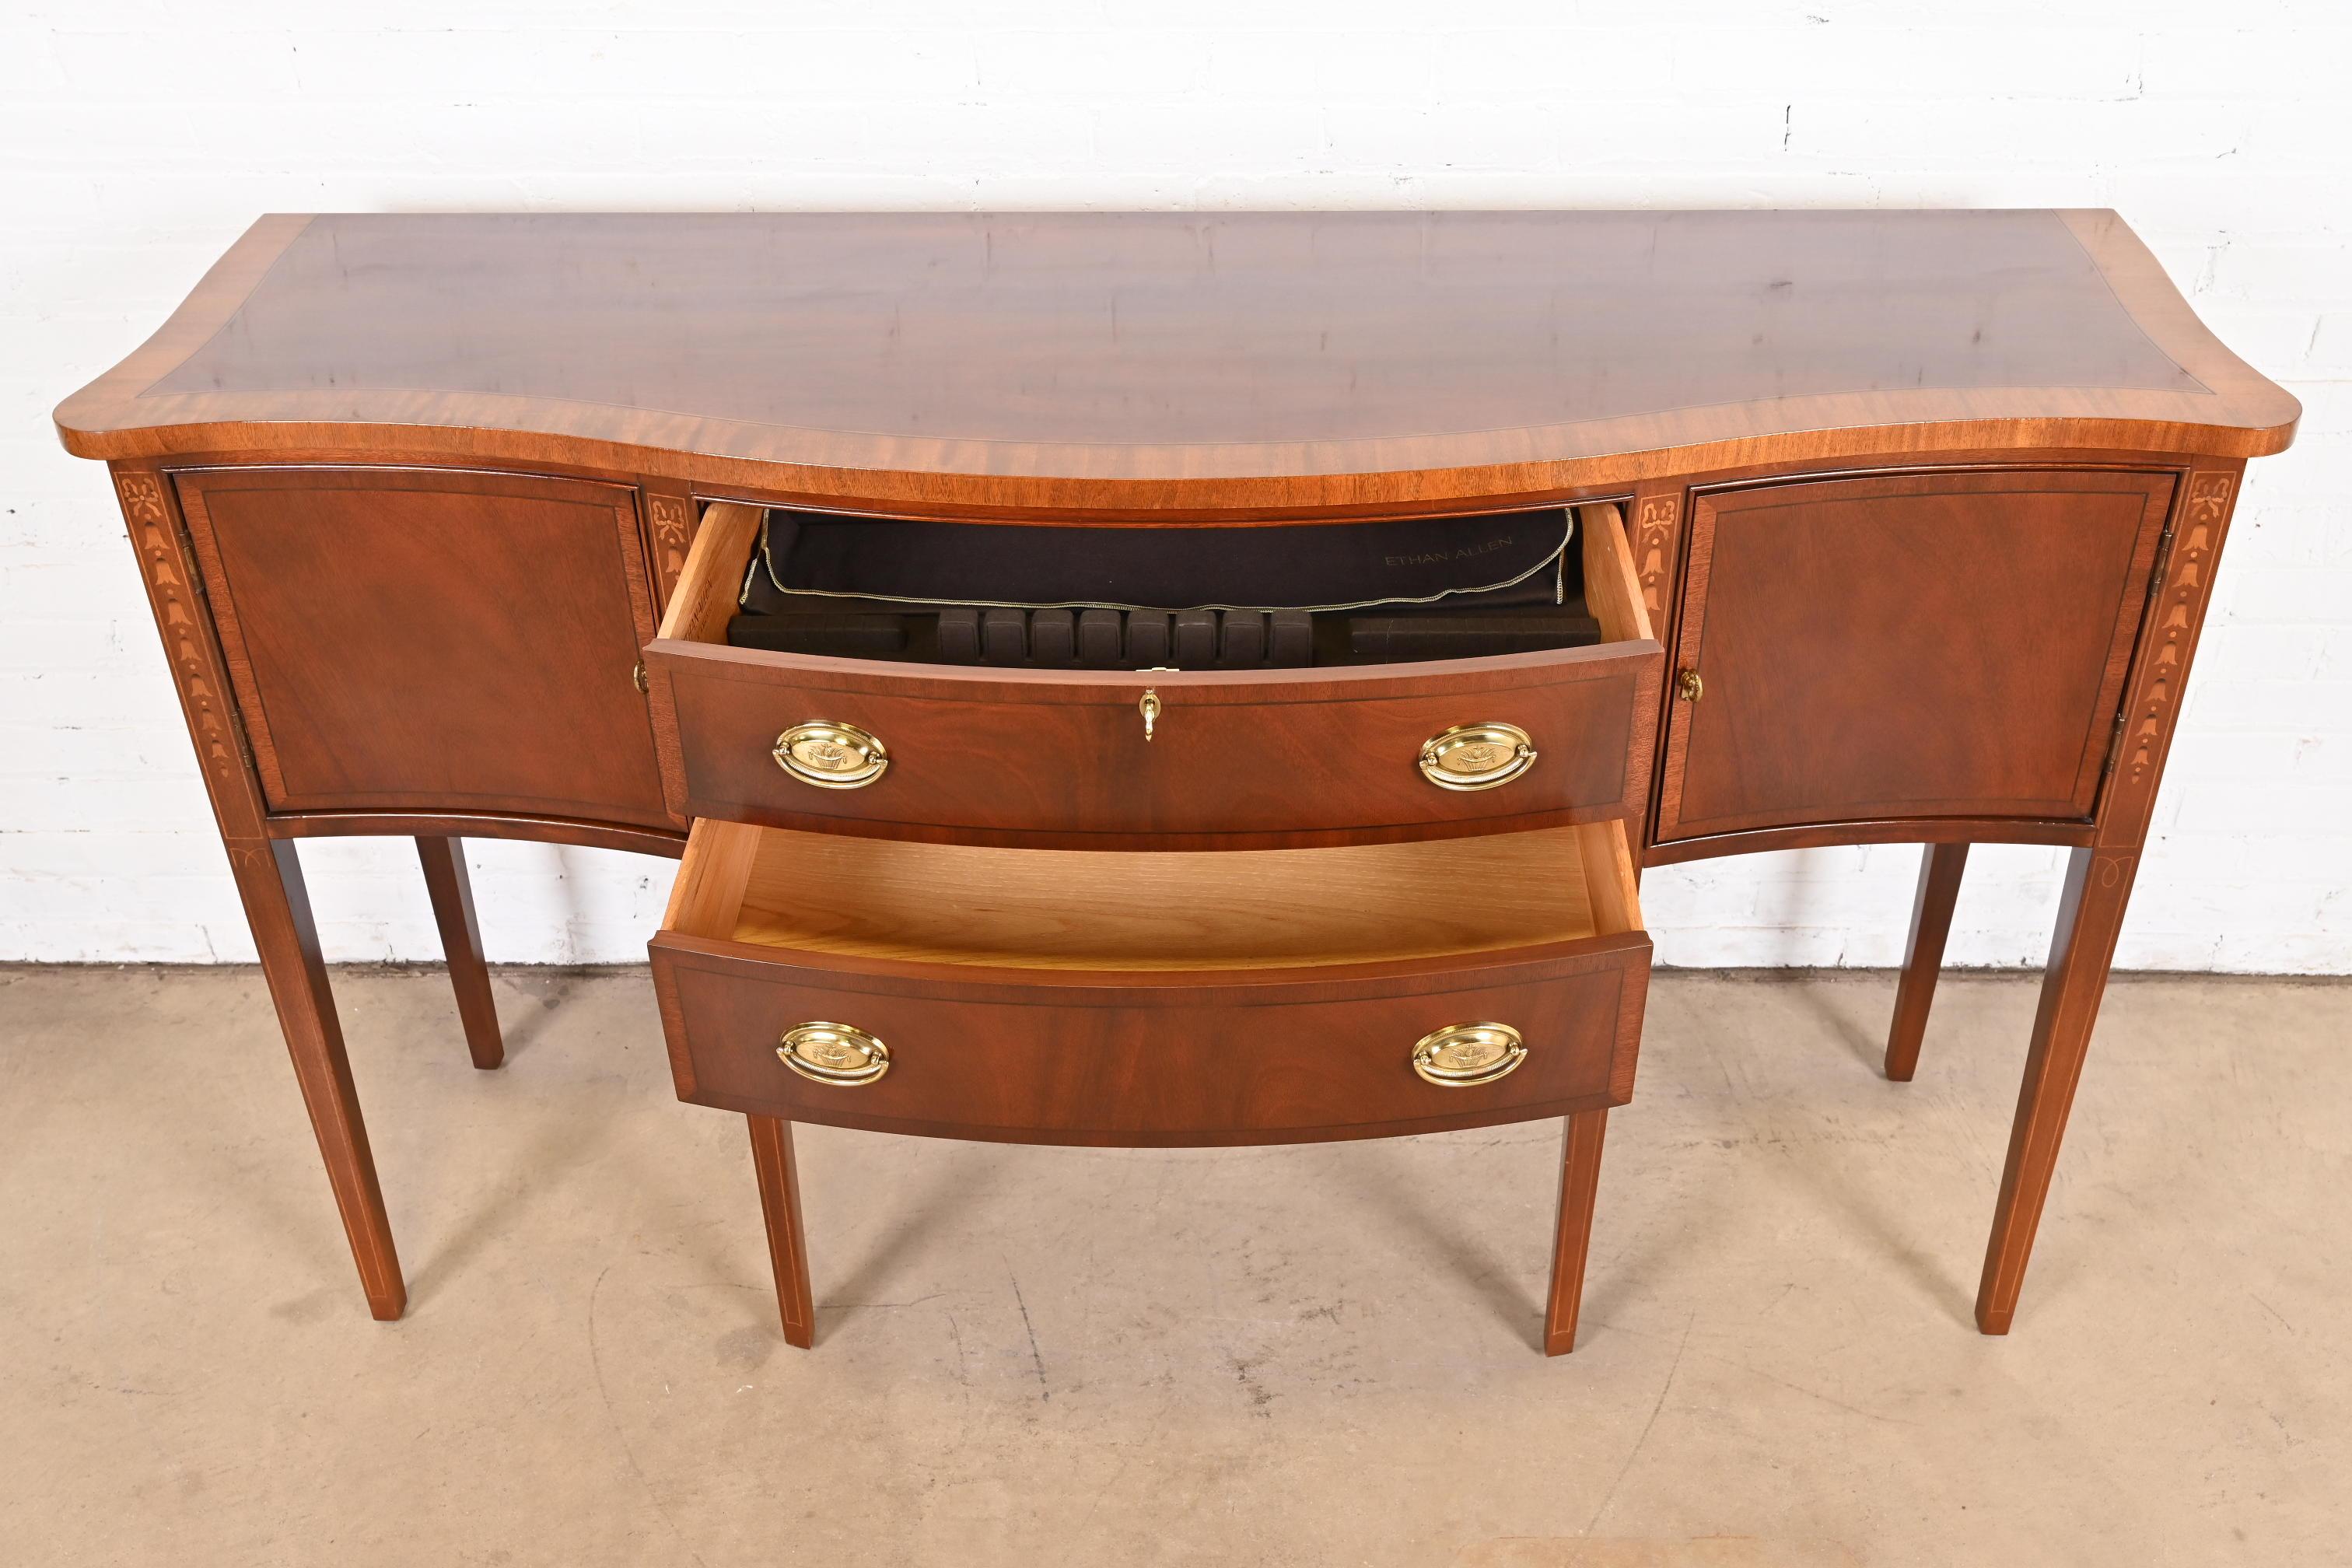 Hepplewhite Inlaid Mahogany Serpentine Front Sideboard Credenza For Sale 3